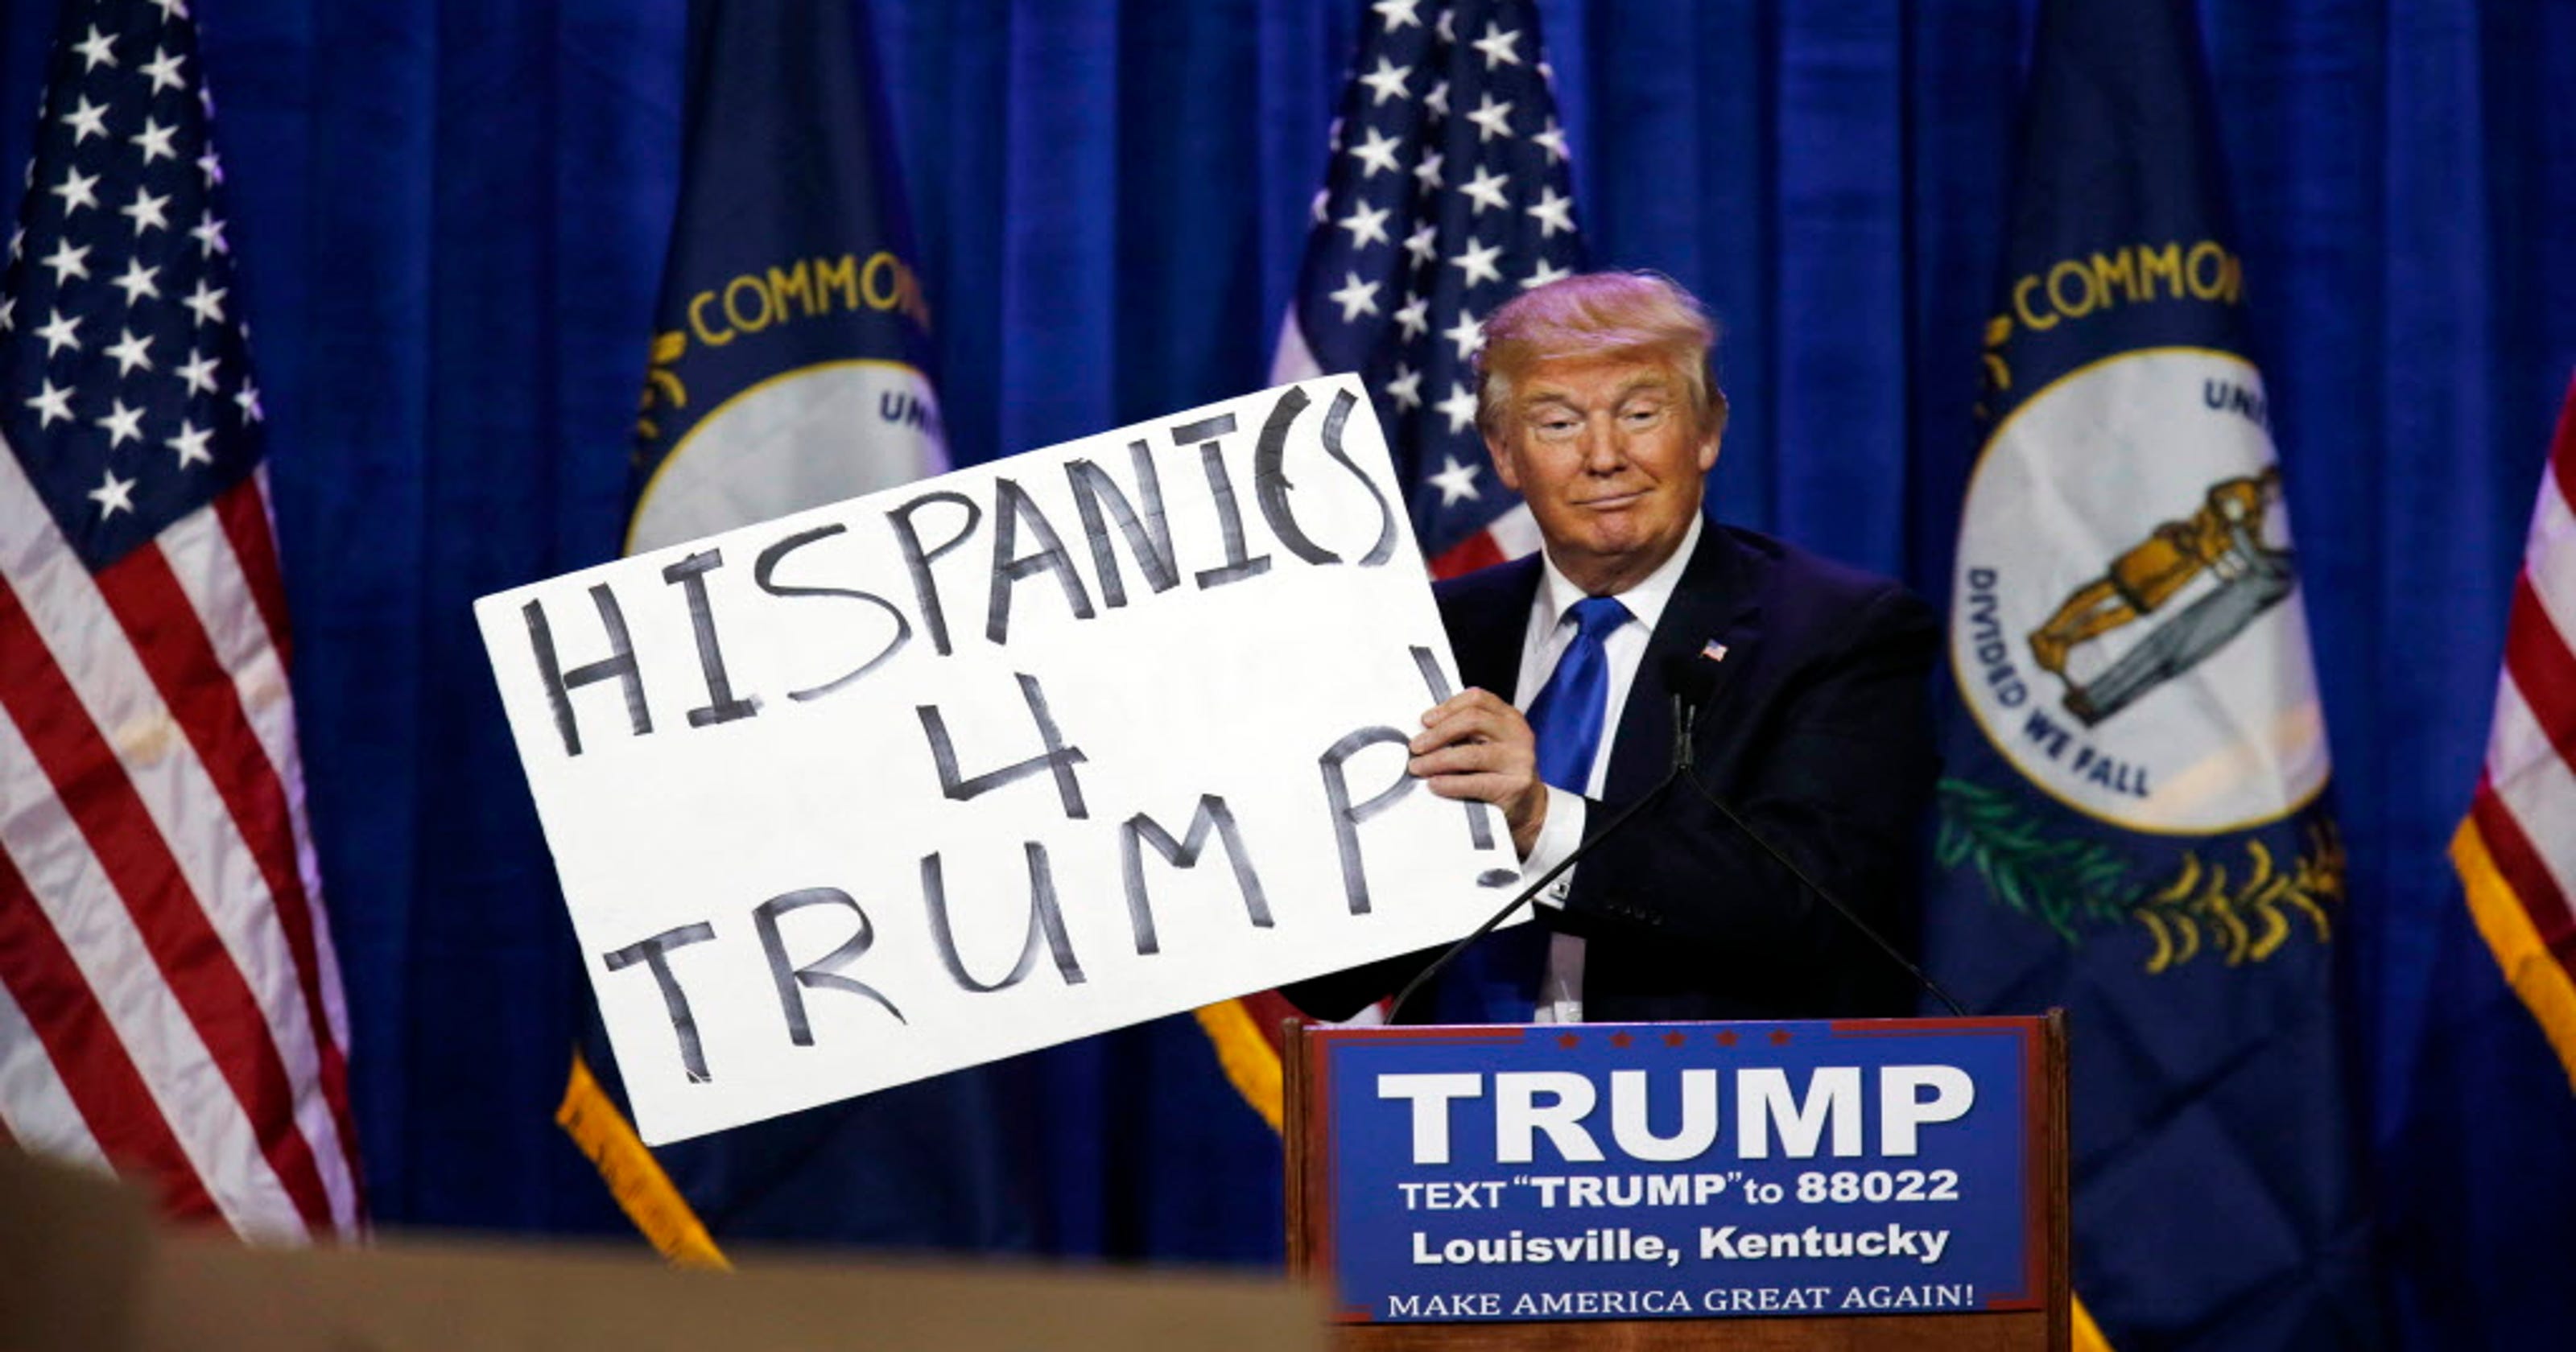 Conservative Hispanics Wait For A Sign To Support Trump